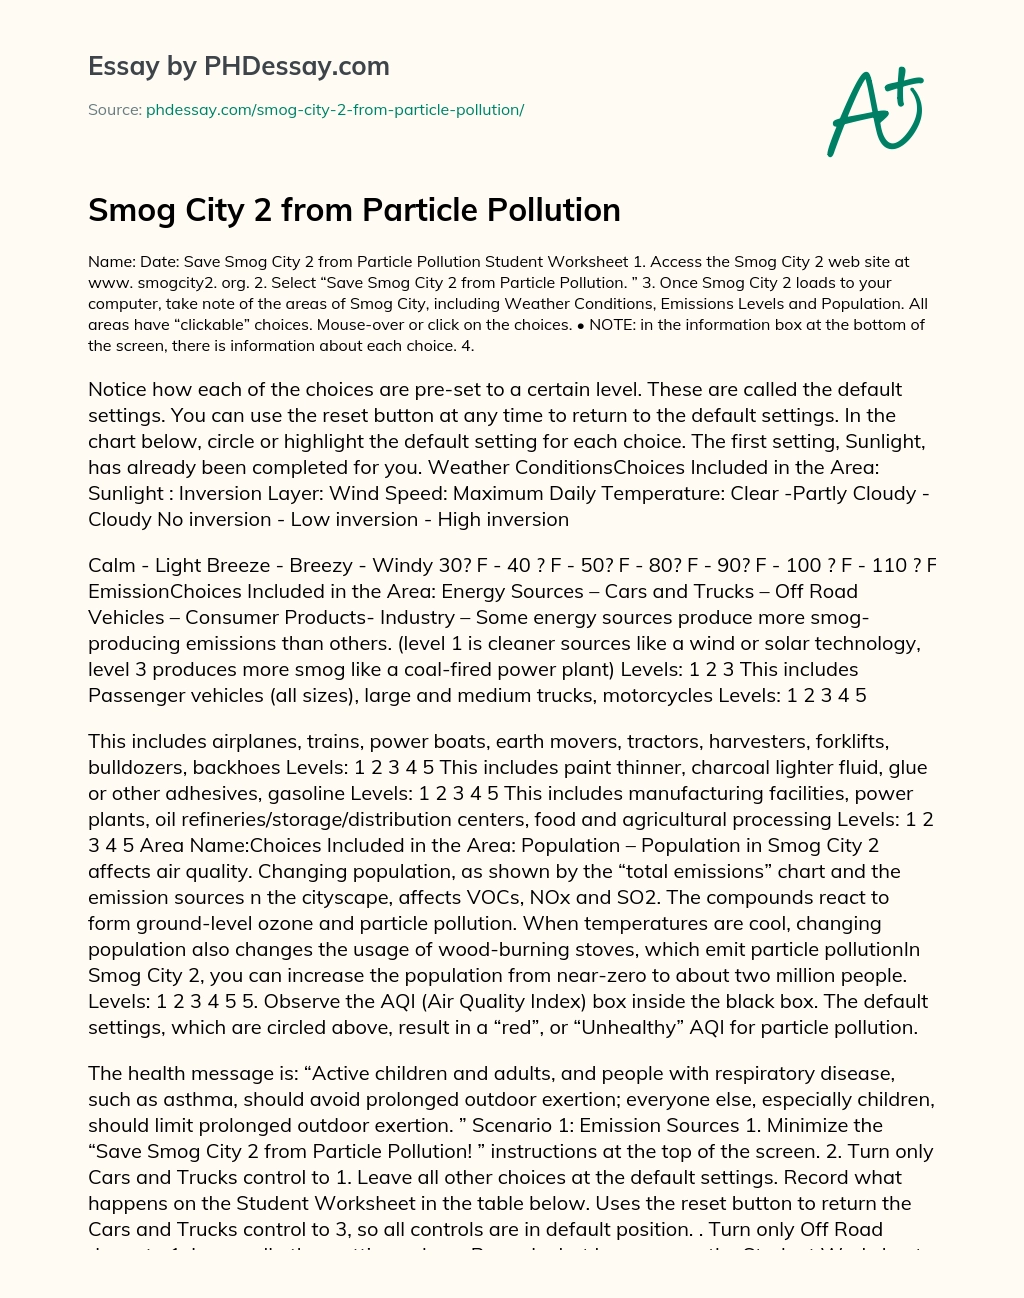 Smog City 2 from Particle Pollution essay